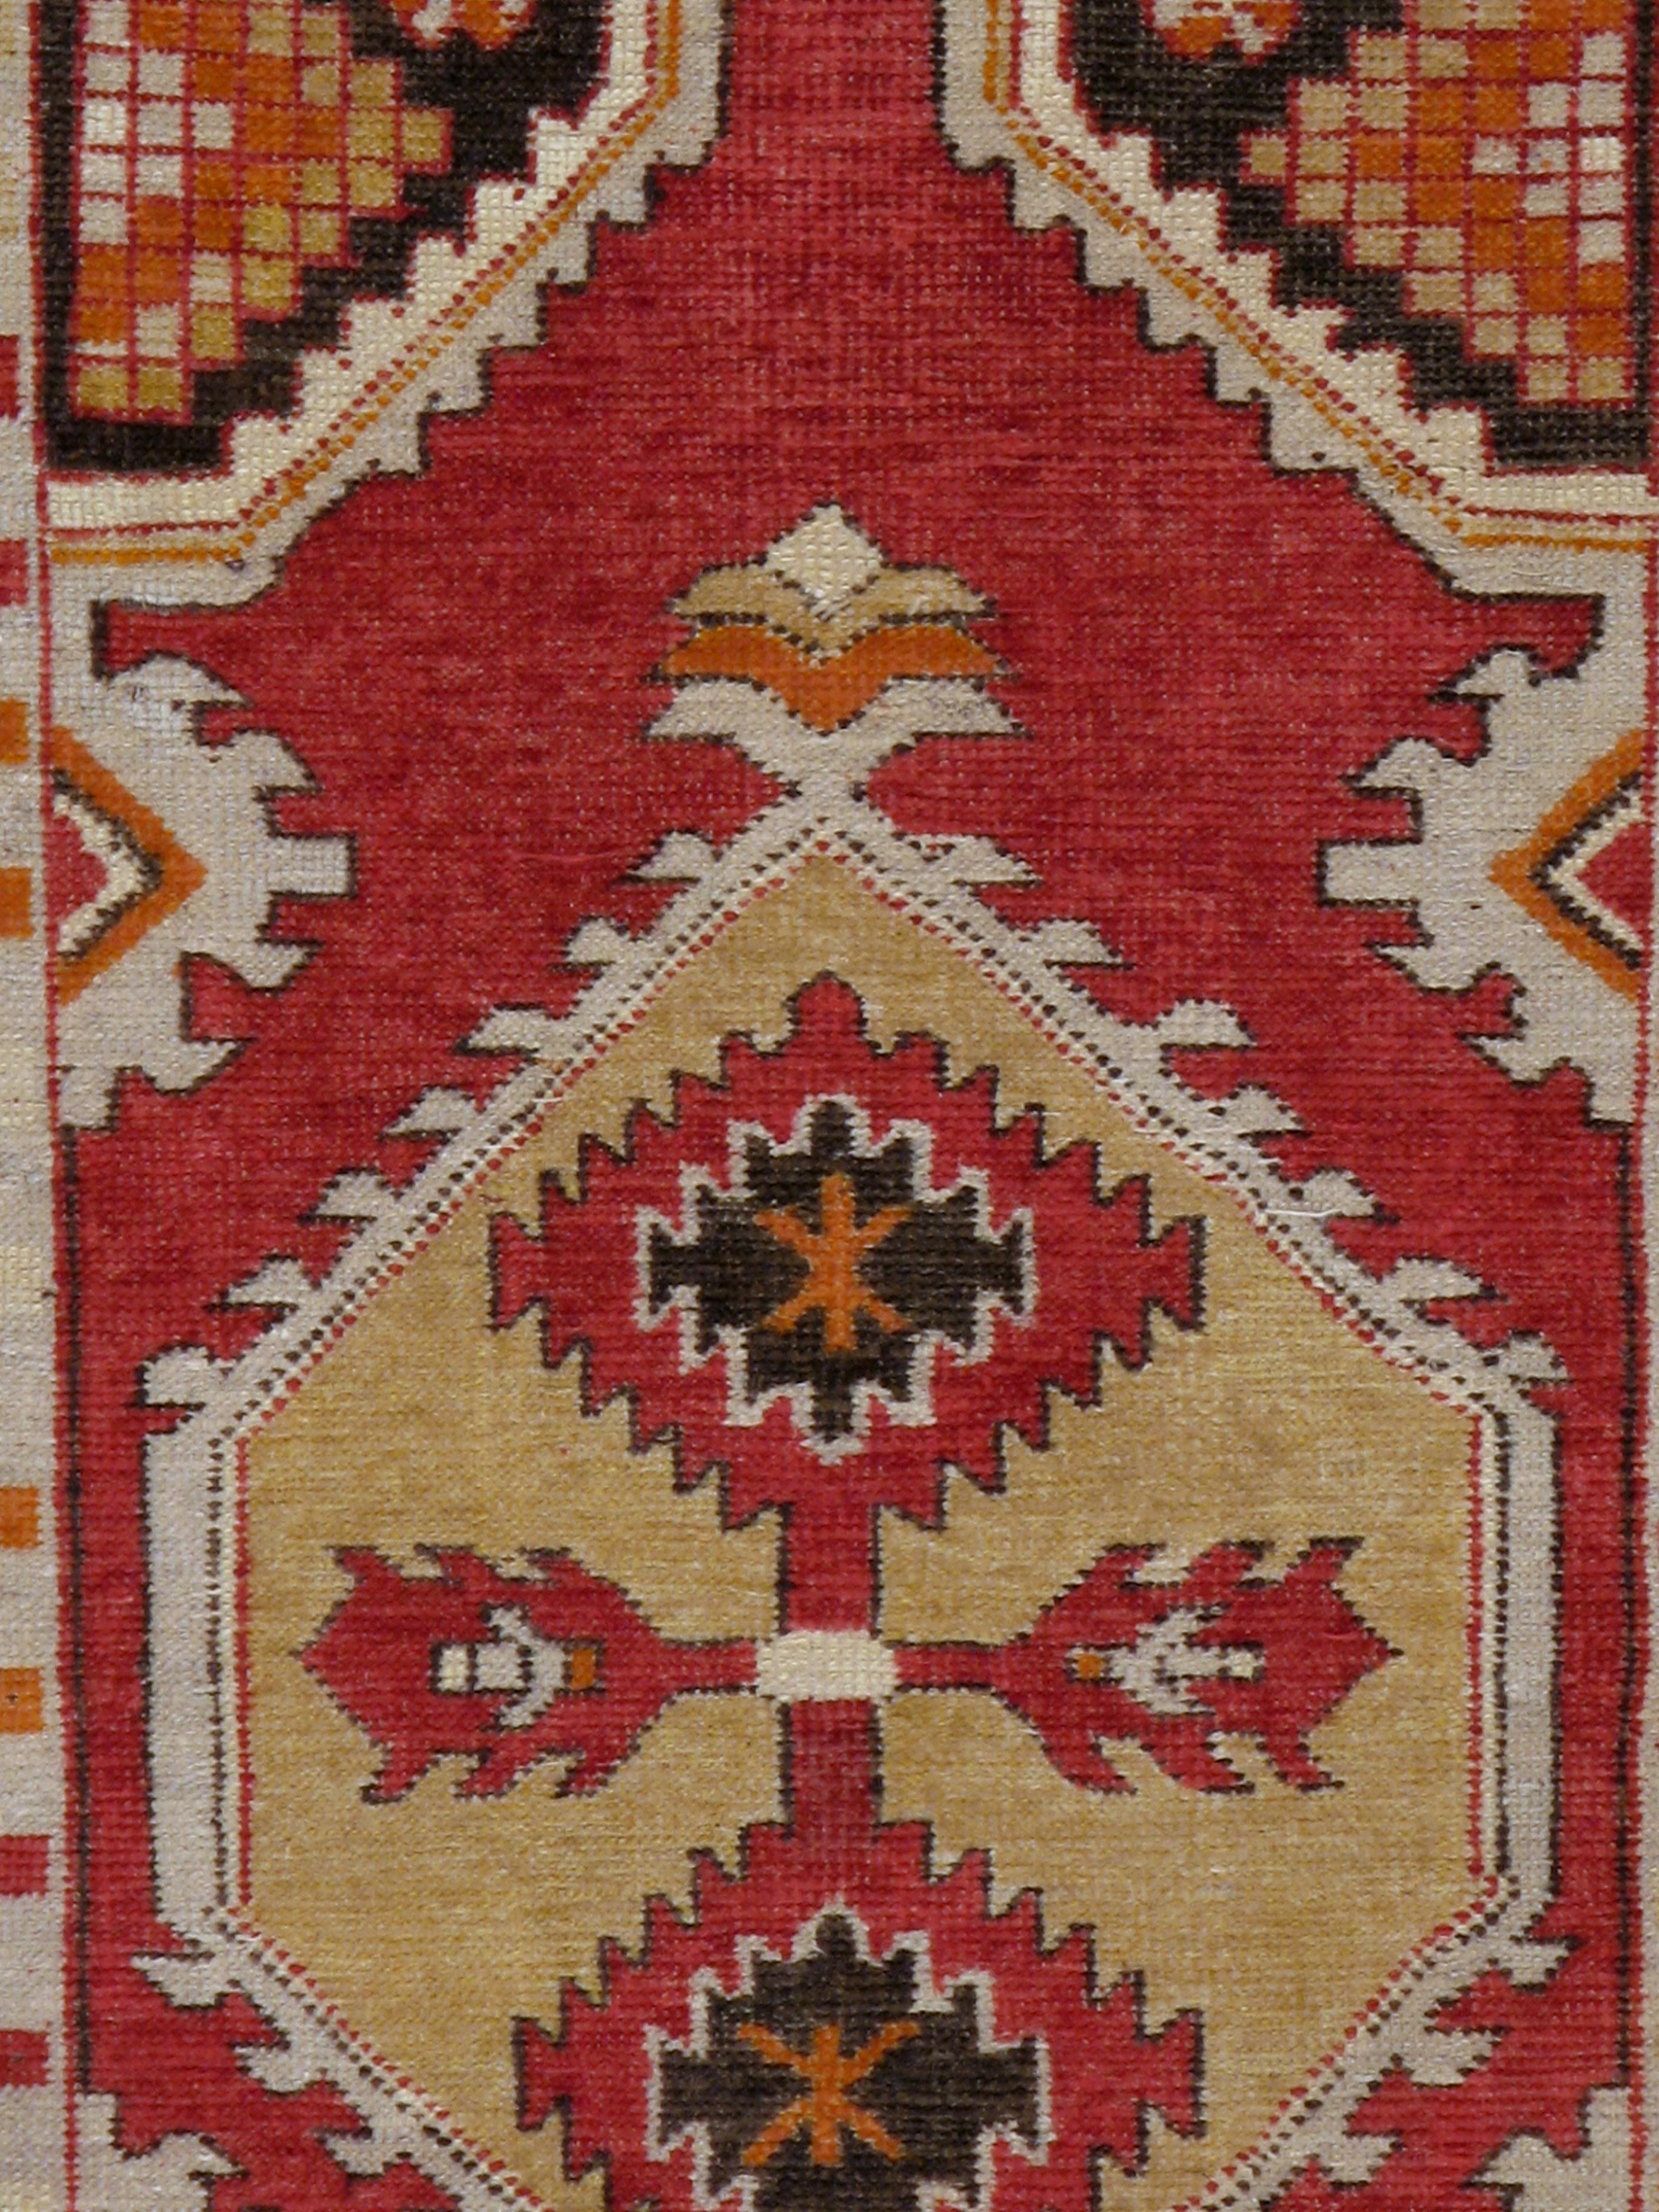 A vintage Turkish Oushak throw rug handmade during the mid-20th century with a red field and ivory border.

Measures: 2' 8